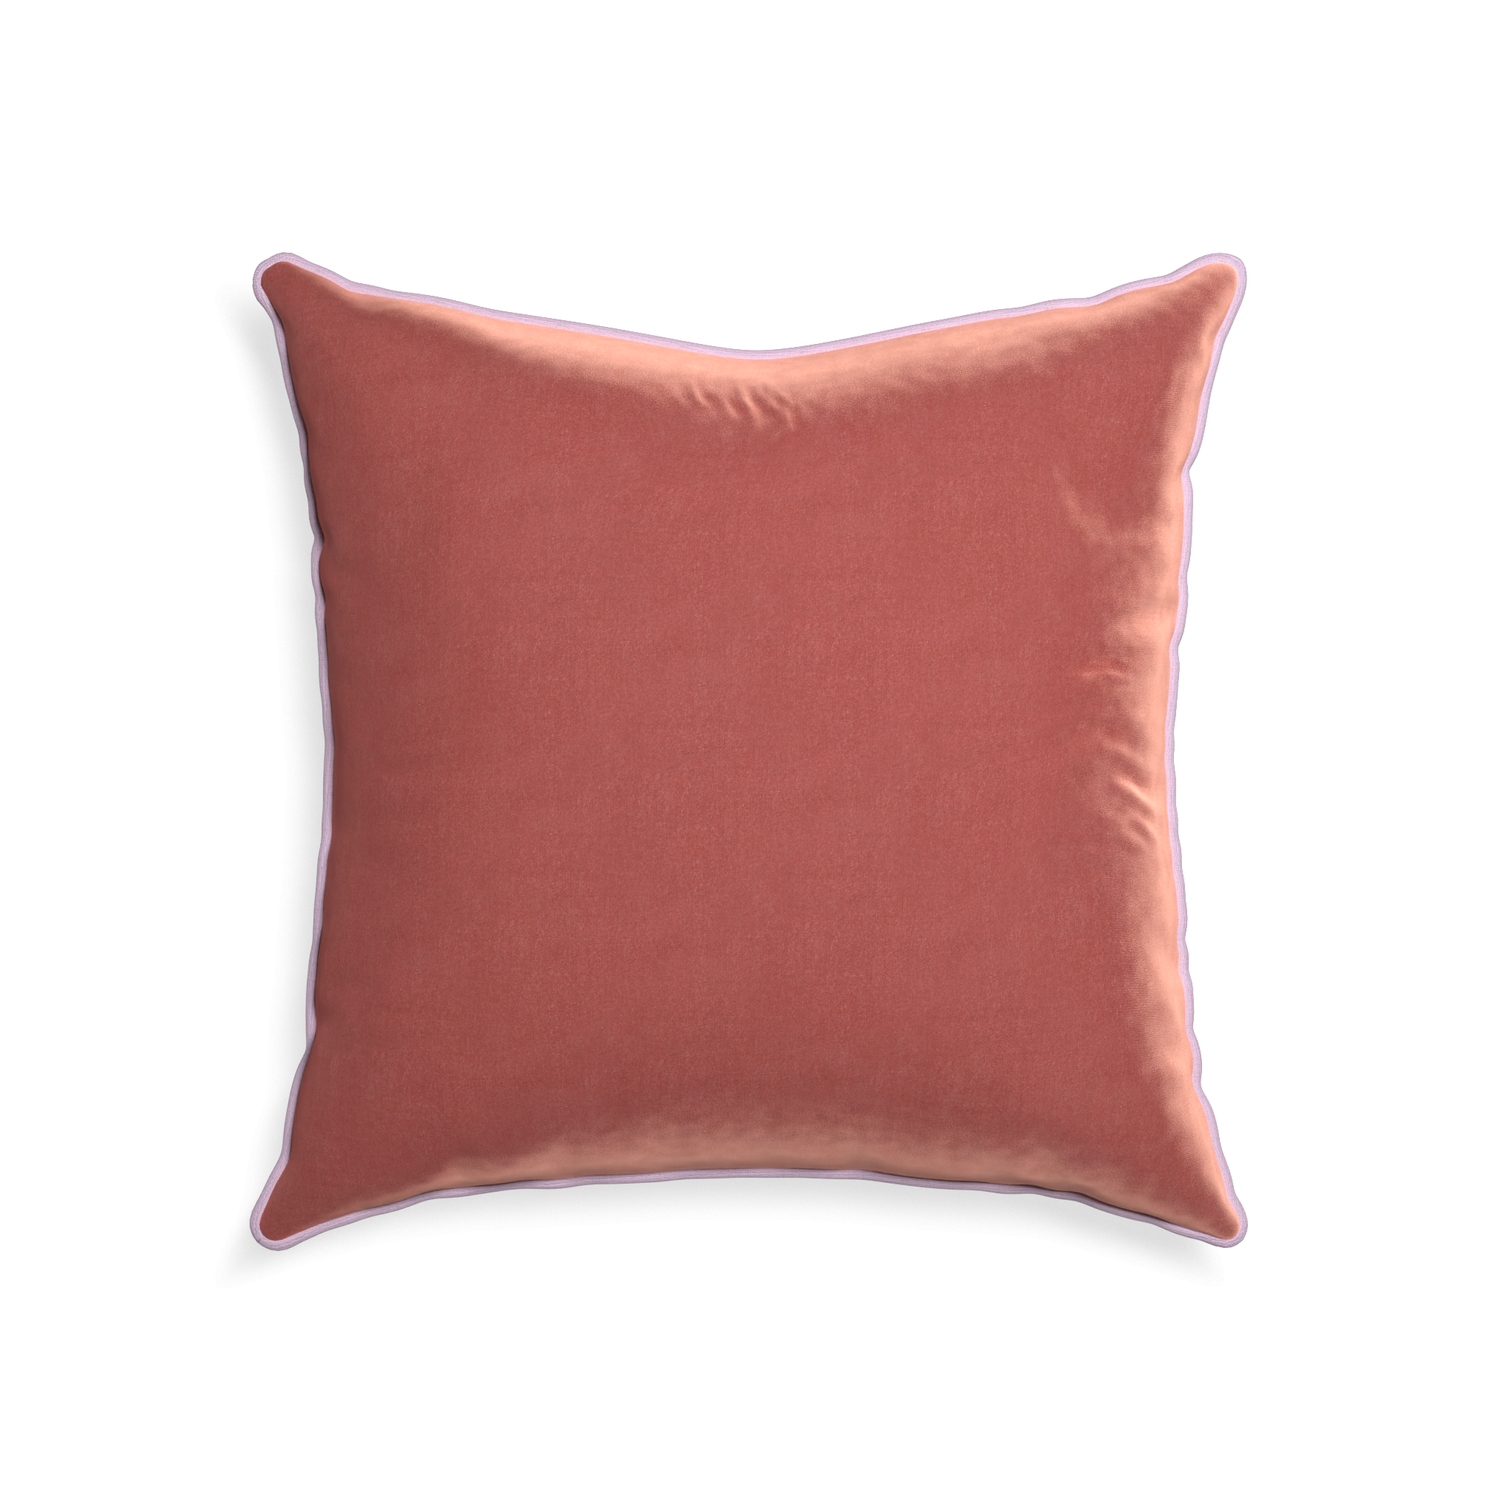 22-square cosmo velvet custom coralpillow with l piping on white background